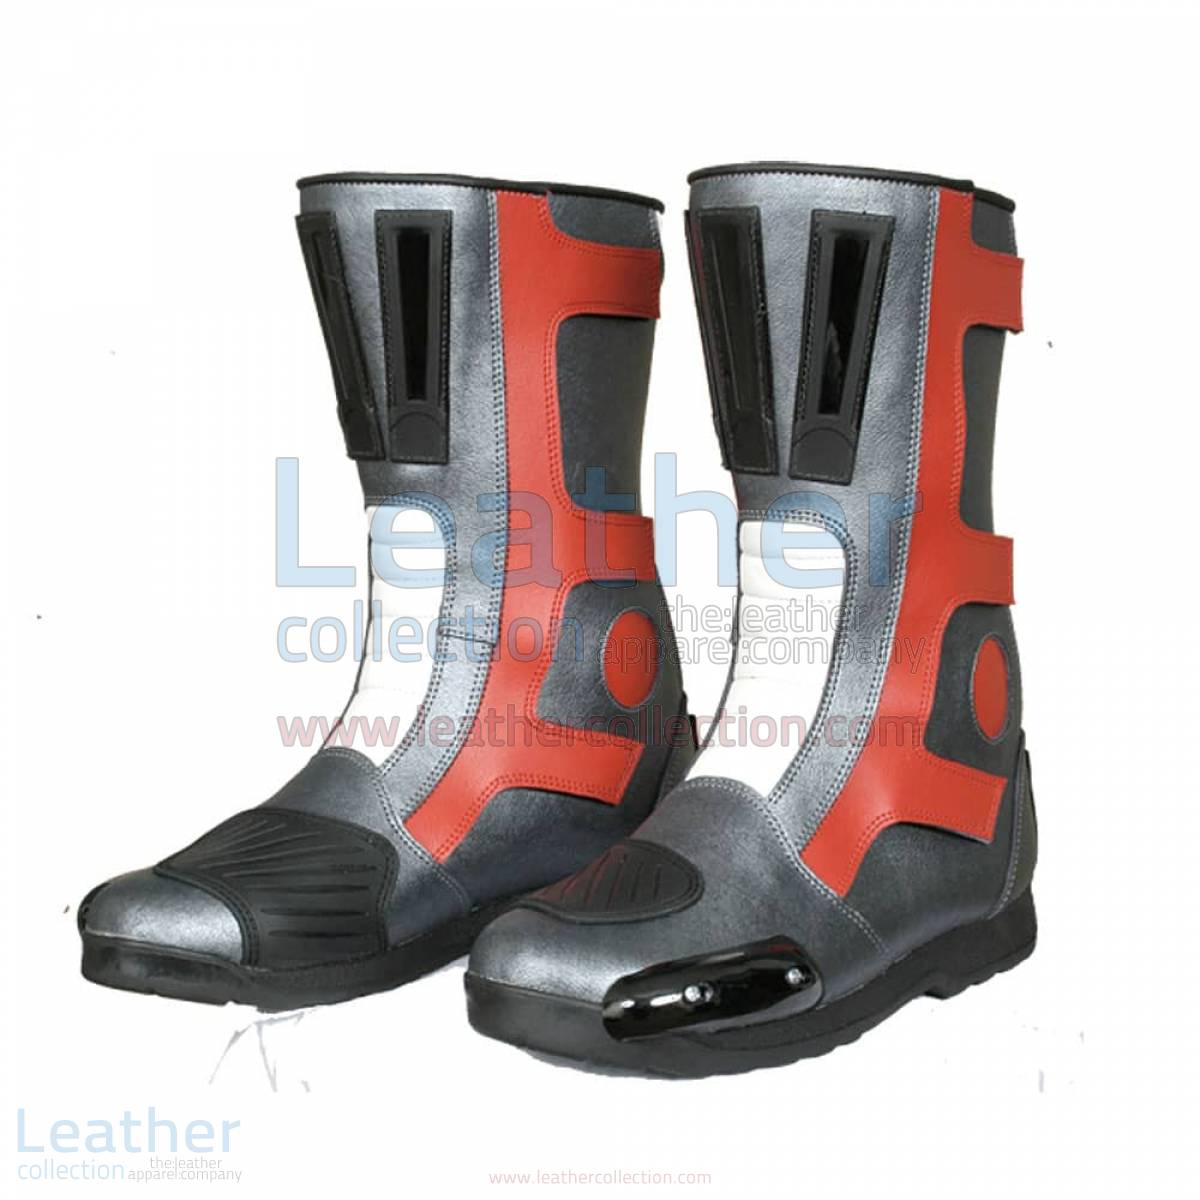 Tourist leather race boots